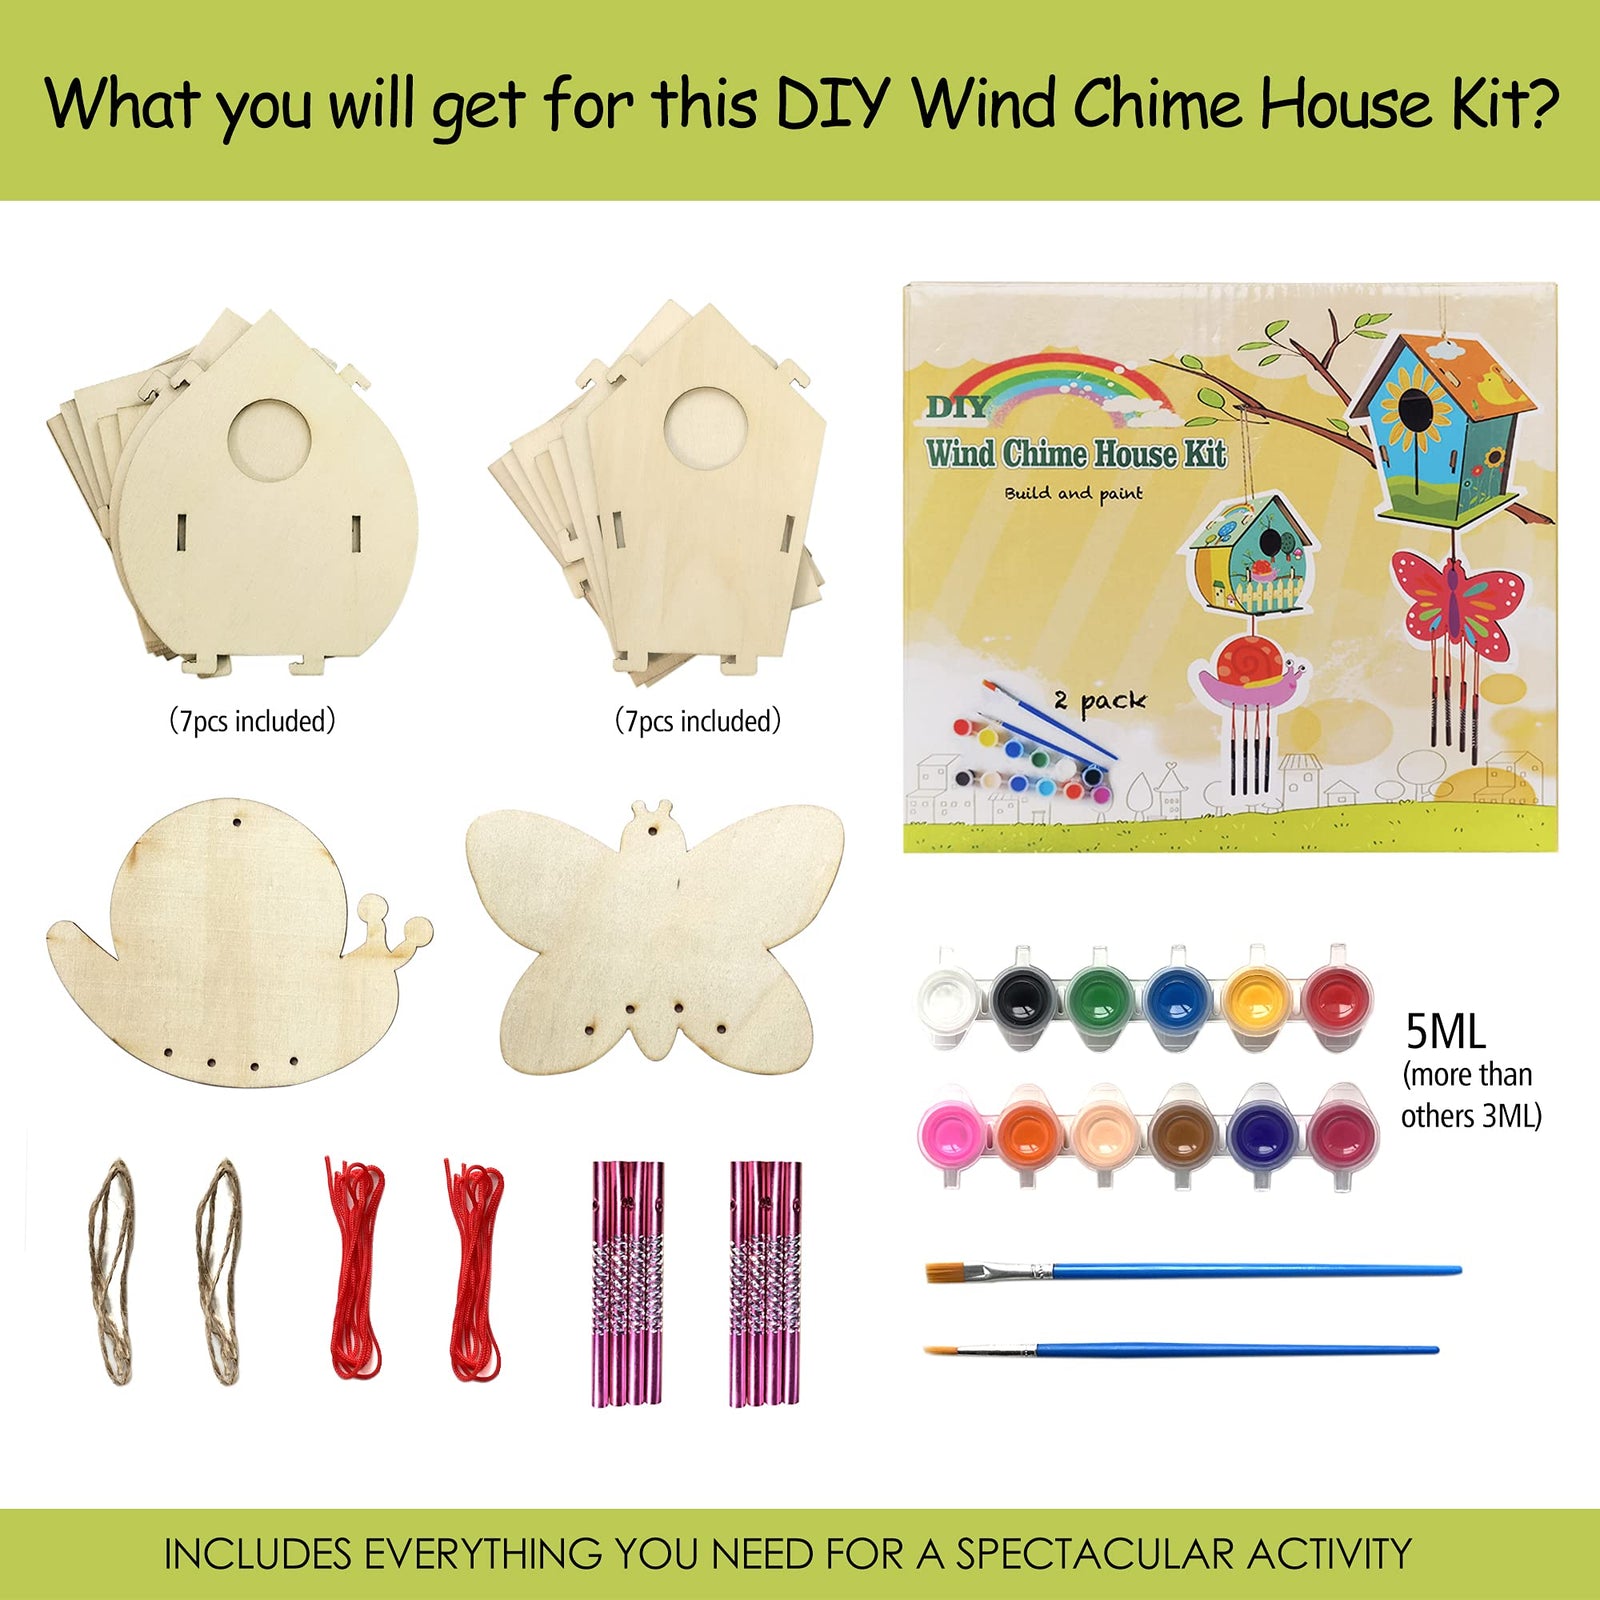 HOME COMPOSER 4 Pack DIY Bird House Wind Chime Kits for Children to Build and Paint, Wooden Arts and Crafts for Kids Girls Boys Toddlers Ages 8-12 4-6 6-8, Paint Kit Includes Paints & Brushes